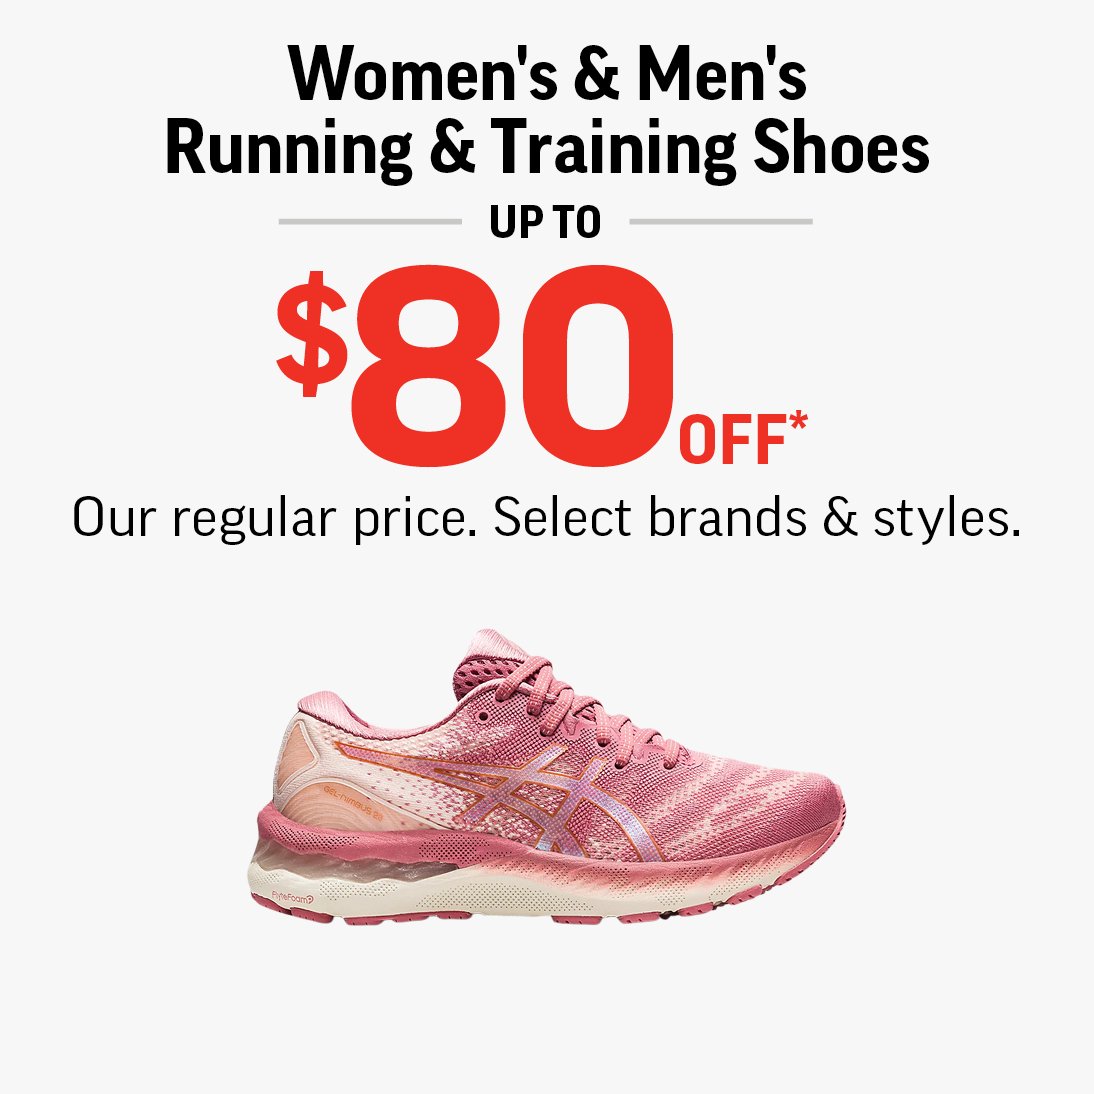 WOMEN'S & MEN'S RUNNING & TRAINING SHOES UP TO $80 OFF